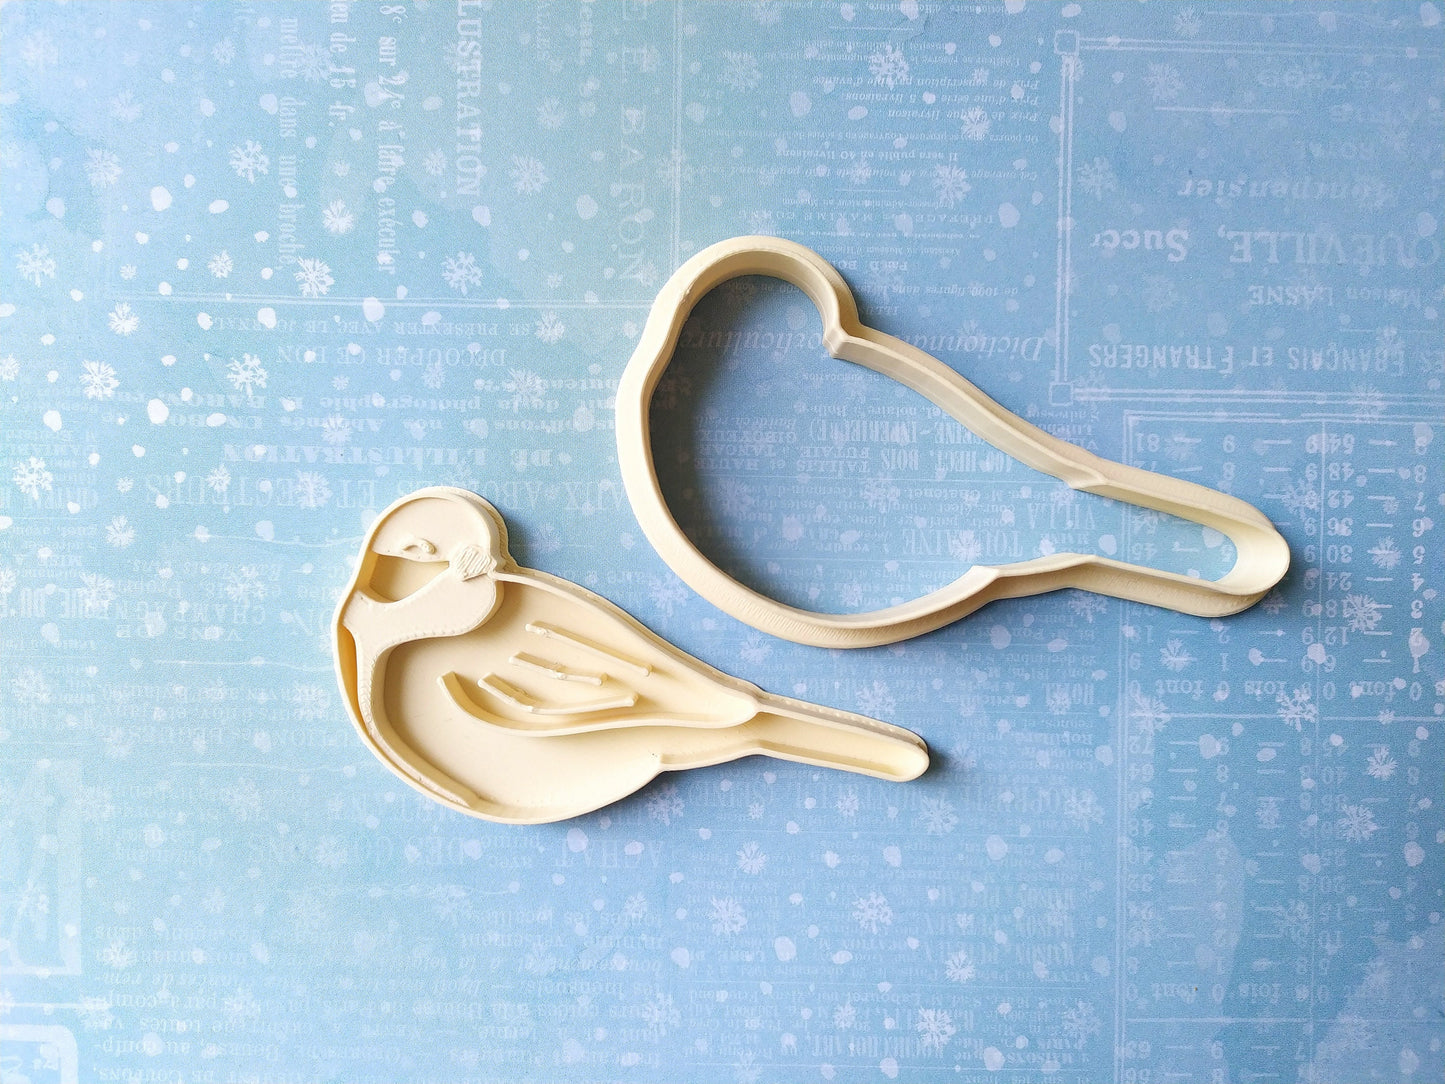 Great tit - cookie cutter set